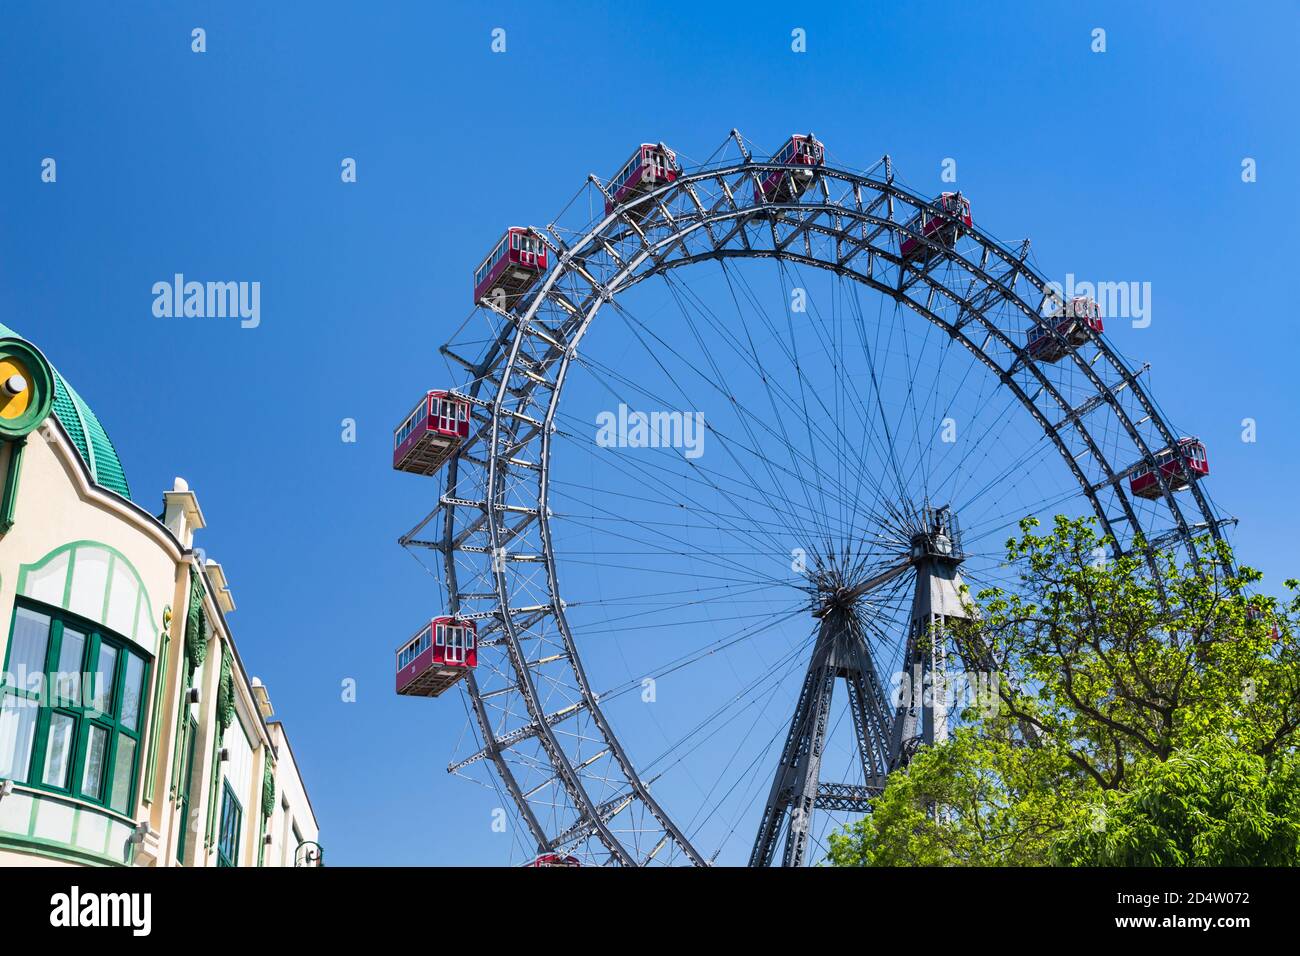 VIENNA - MAY 6: View of the famous ferris wheel Wiener Riesenrad in the Prater amusement park in Vienna, Austria on May 6, 2018 Stock Photo